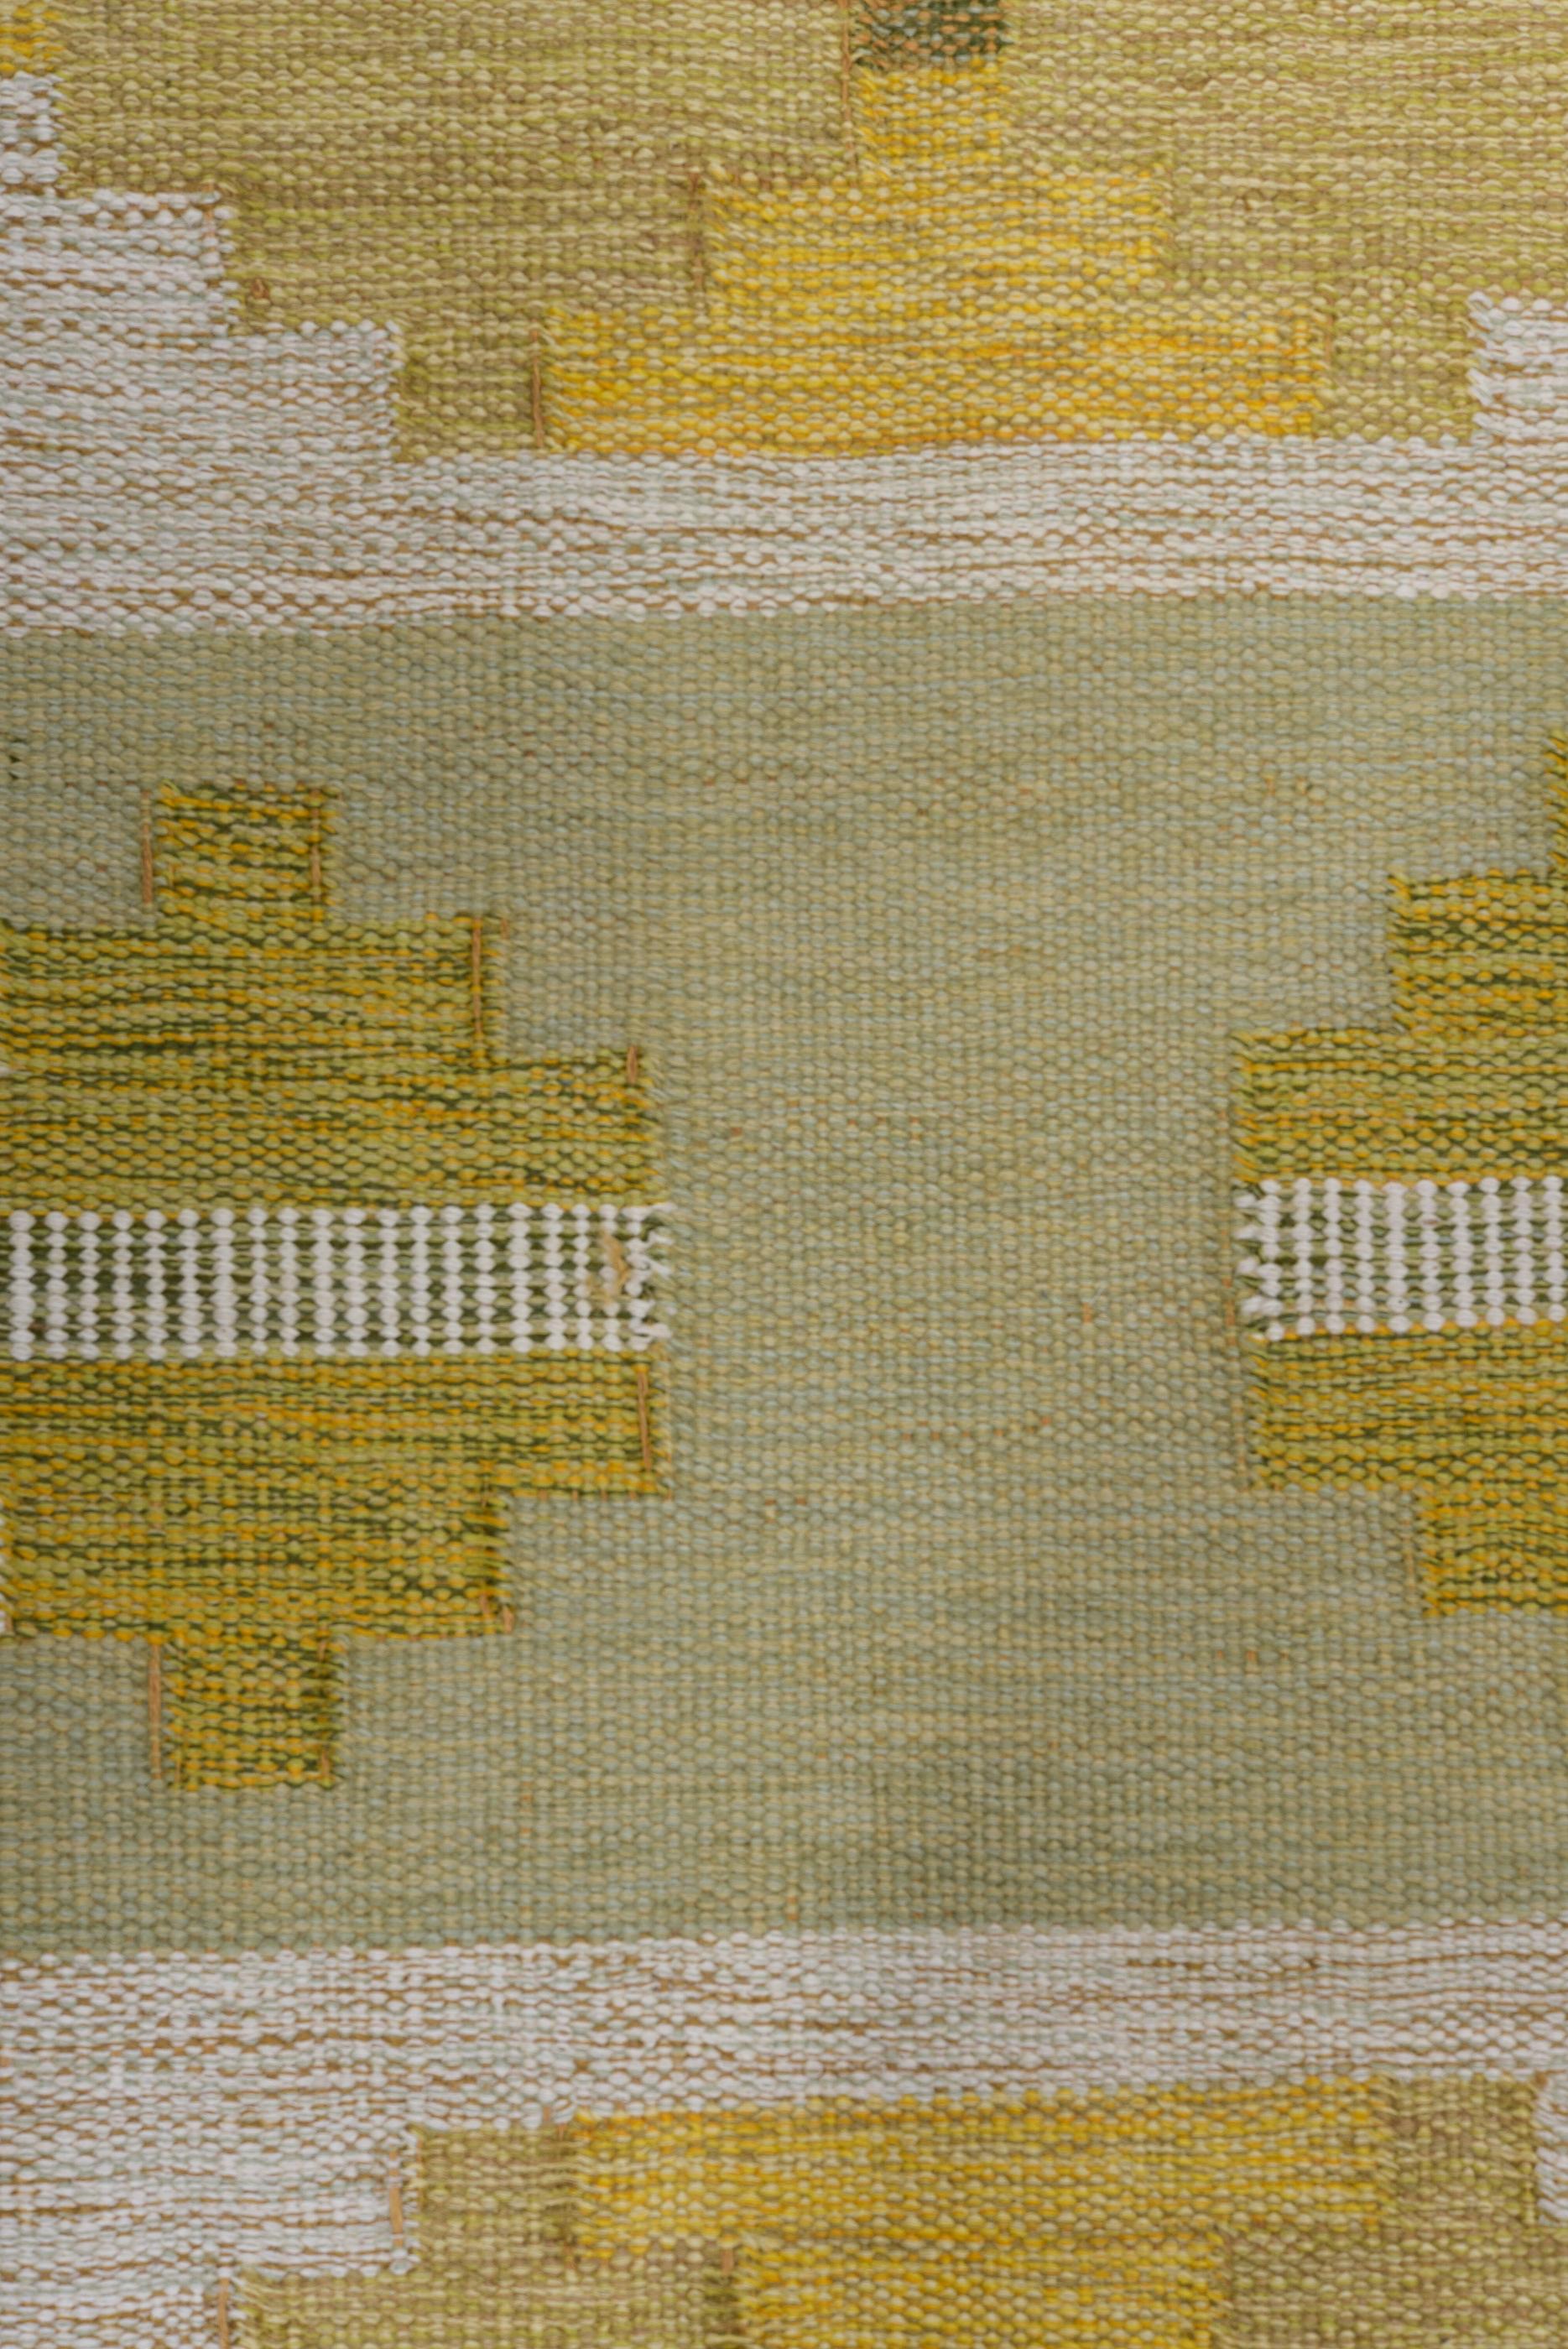 Eliko Rugs by David Ariel Vintage Swedish Rollakan Rug, Green/Yellow Palette In Excellent Condition For Sale In New York, NY